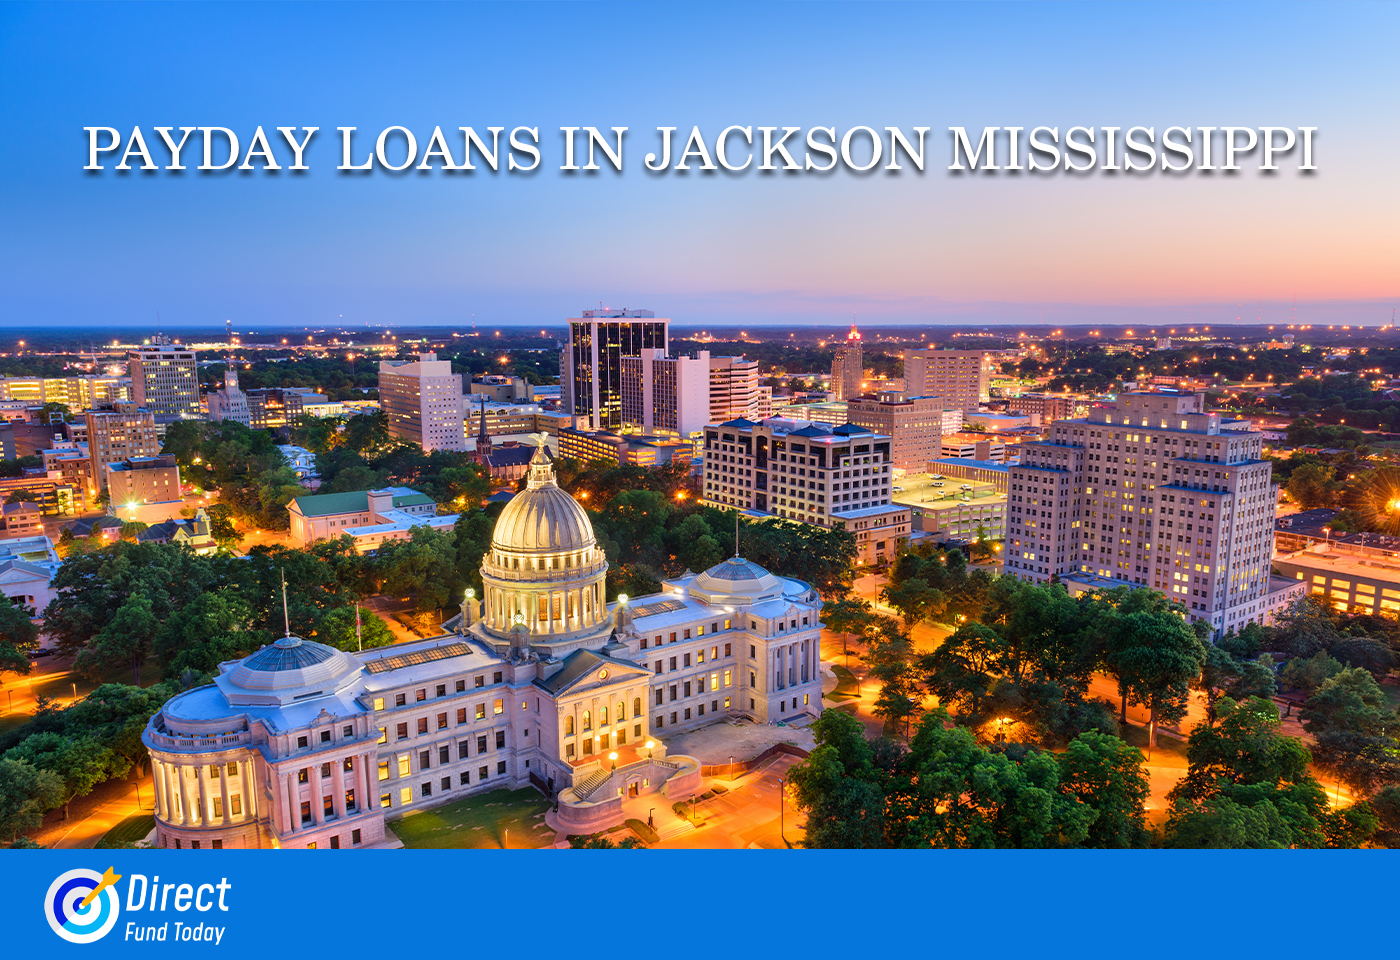 Payday loans in Jackson Mississippi